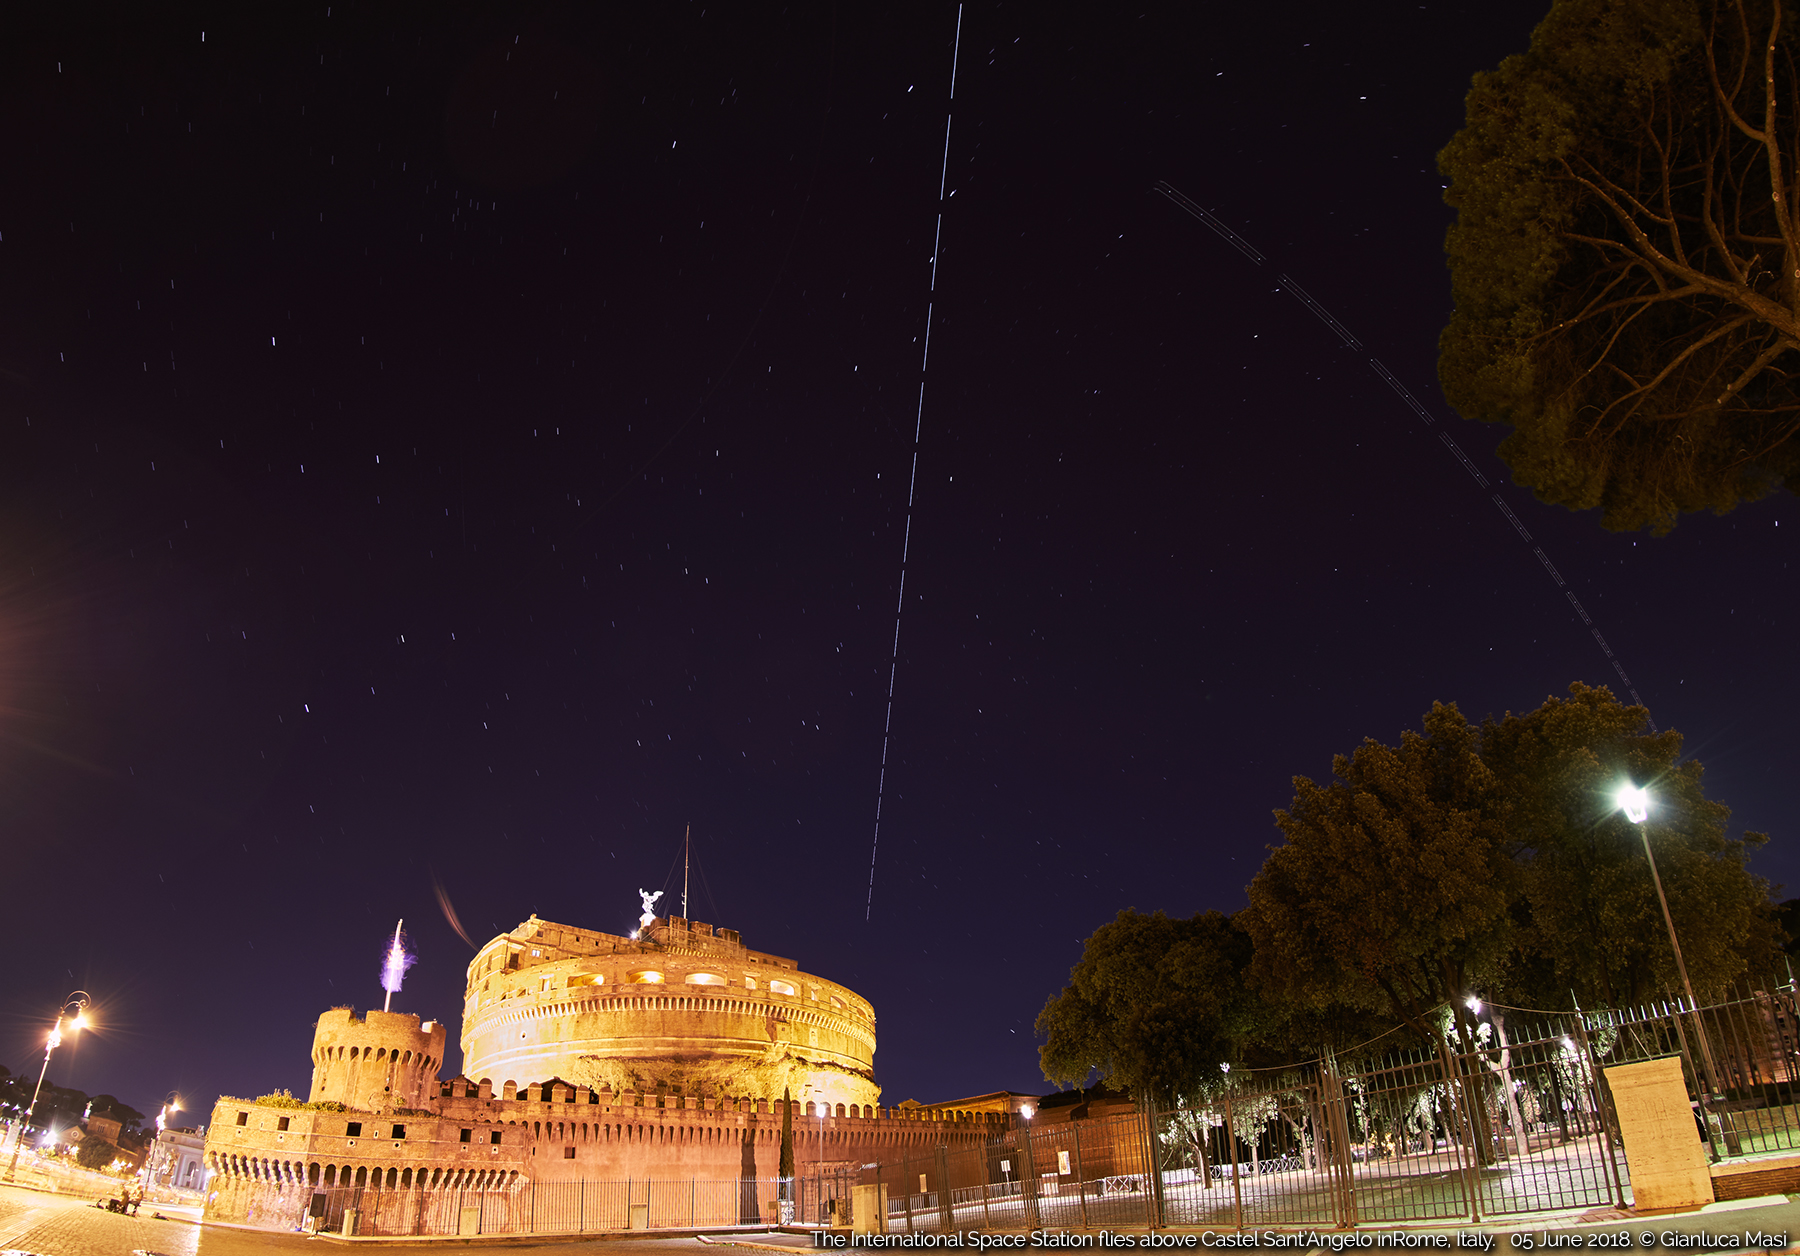 The International Space Station passes above "Castel Sant'Angelo" in Rome. 5 June 2018.